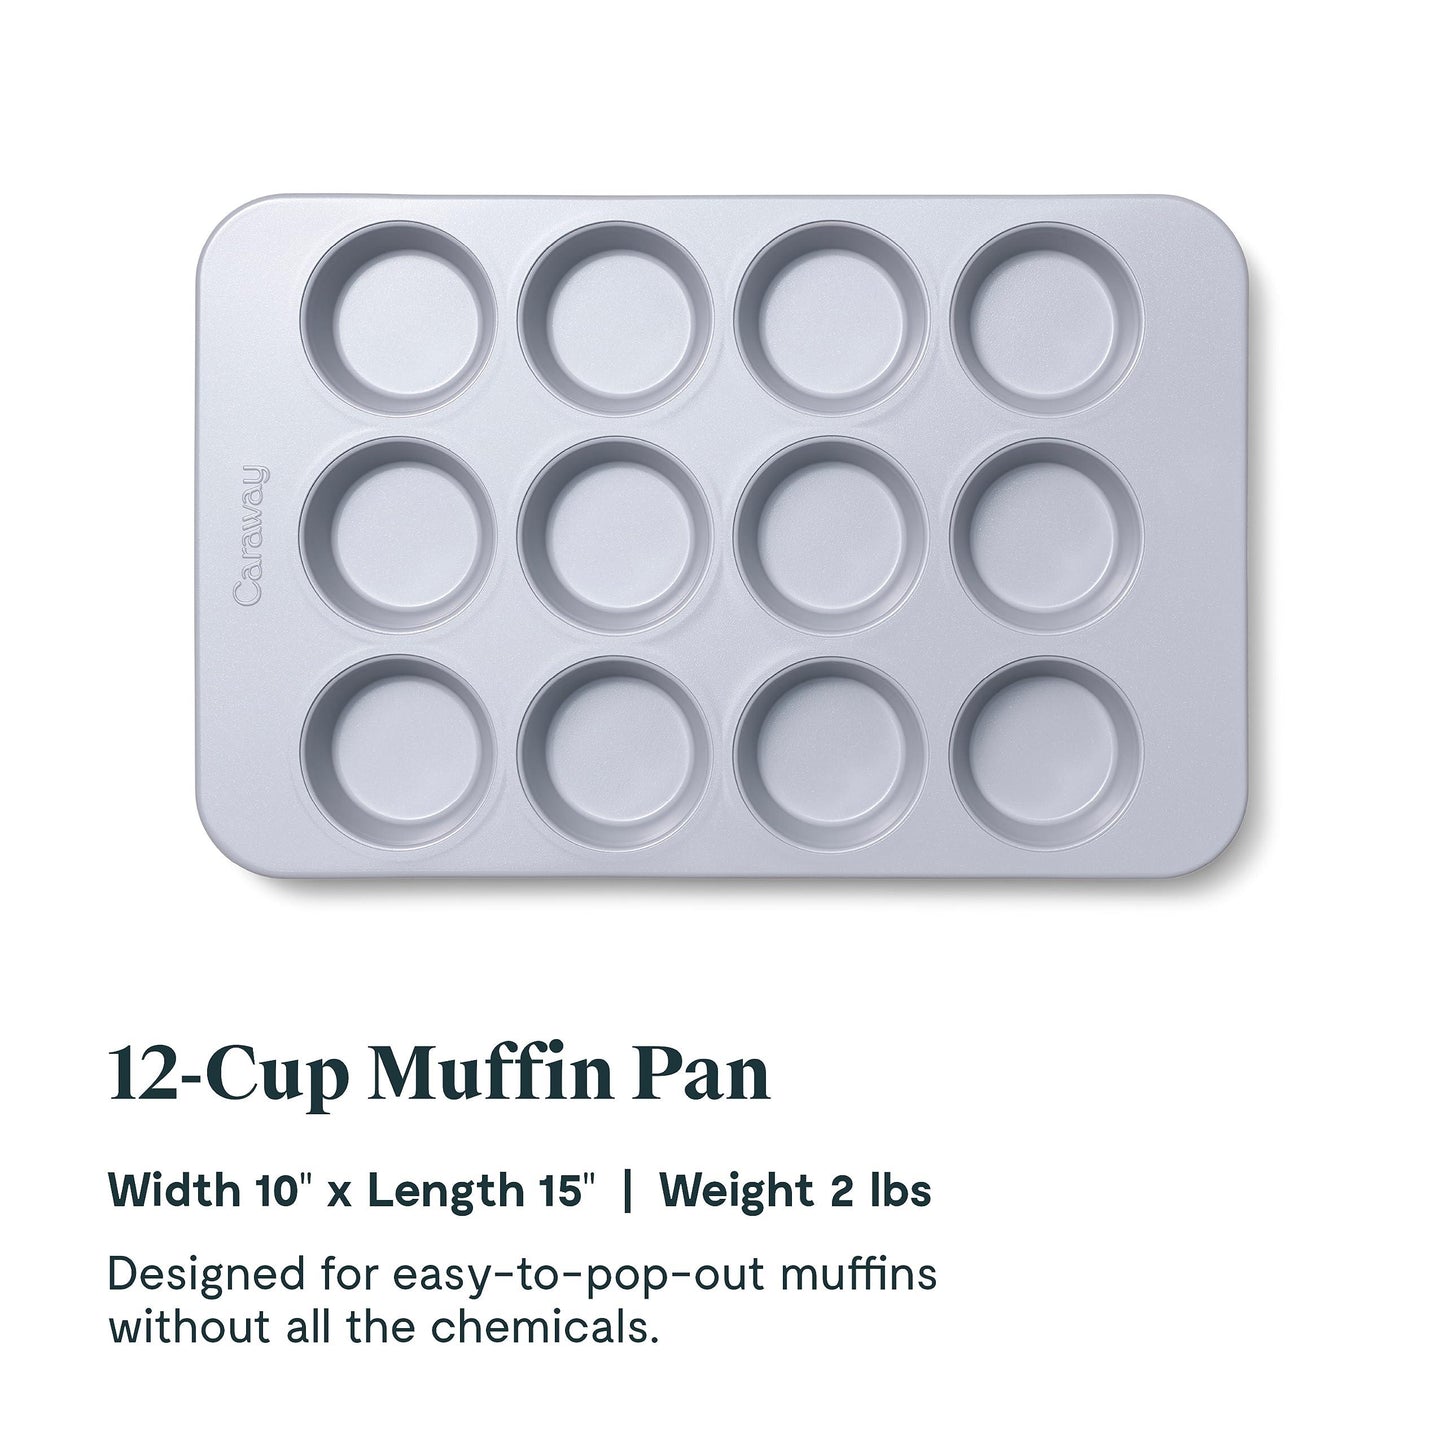 Caraway Non-Stick Ceramic 12-Cup Muffin Pan - Naturally Slick Ceramic Coating - Non-Toxic, PTFE & PFOA Free - Perfect for Cupcakes, Muffins, and More - Navy - CookCave